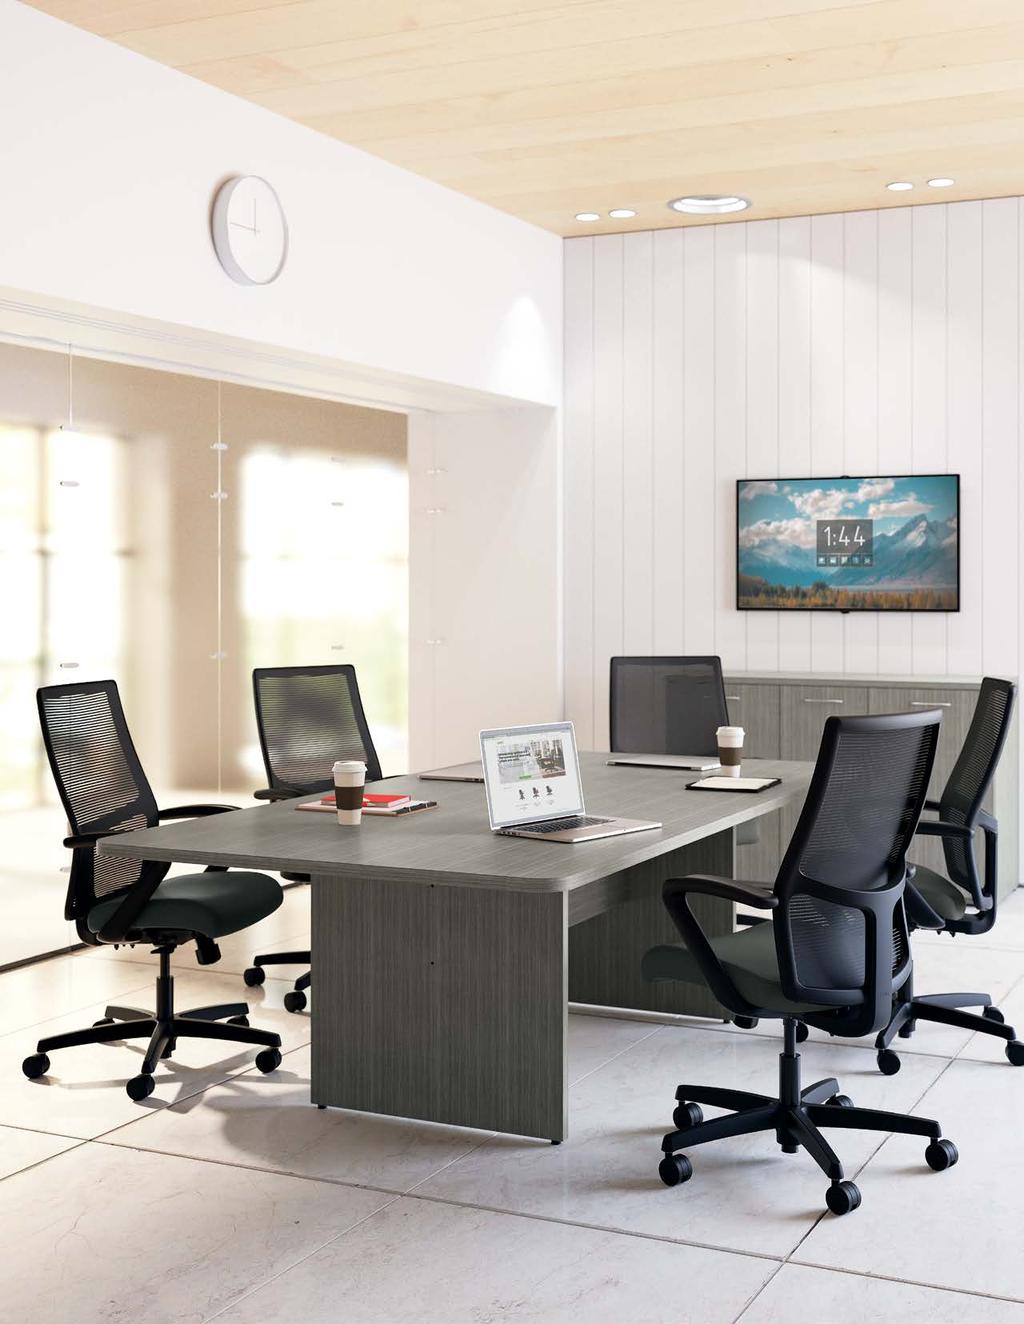 MEETING ROOM From casual team training sessions to allcompany conferences, outfit any boardroom with furniture solutions